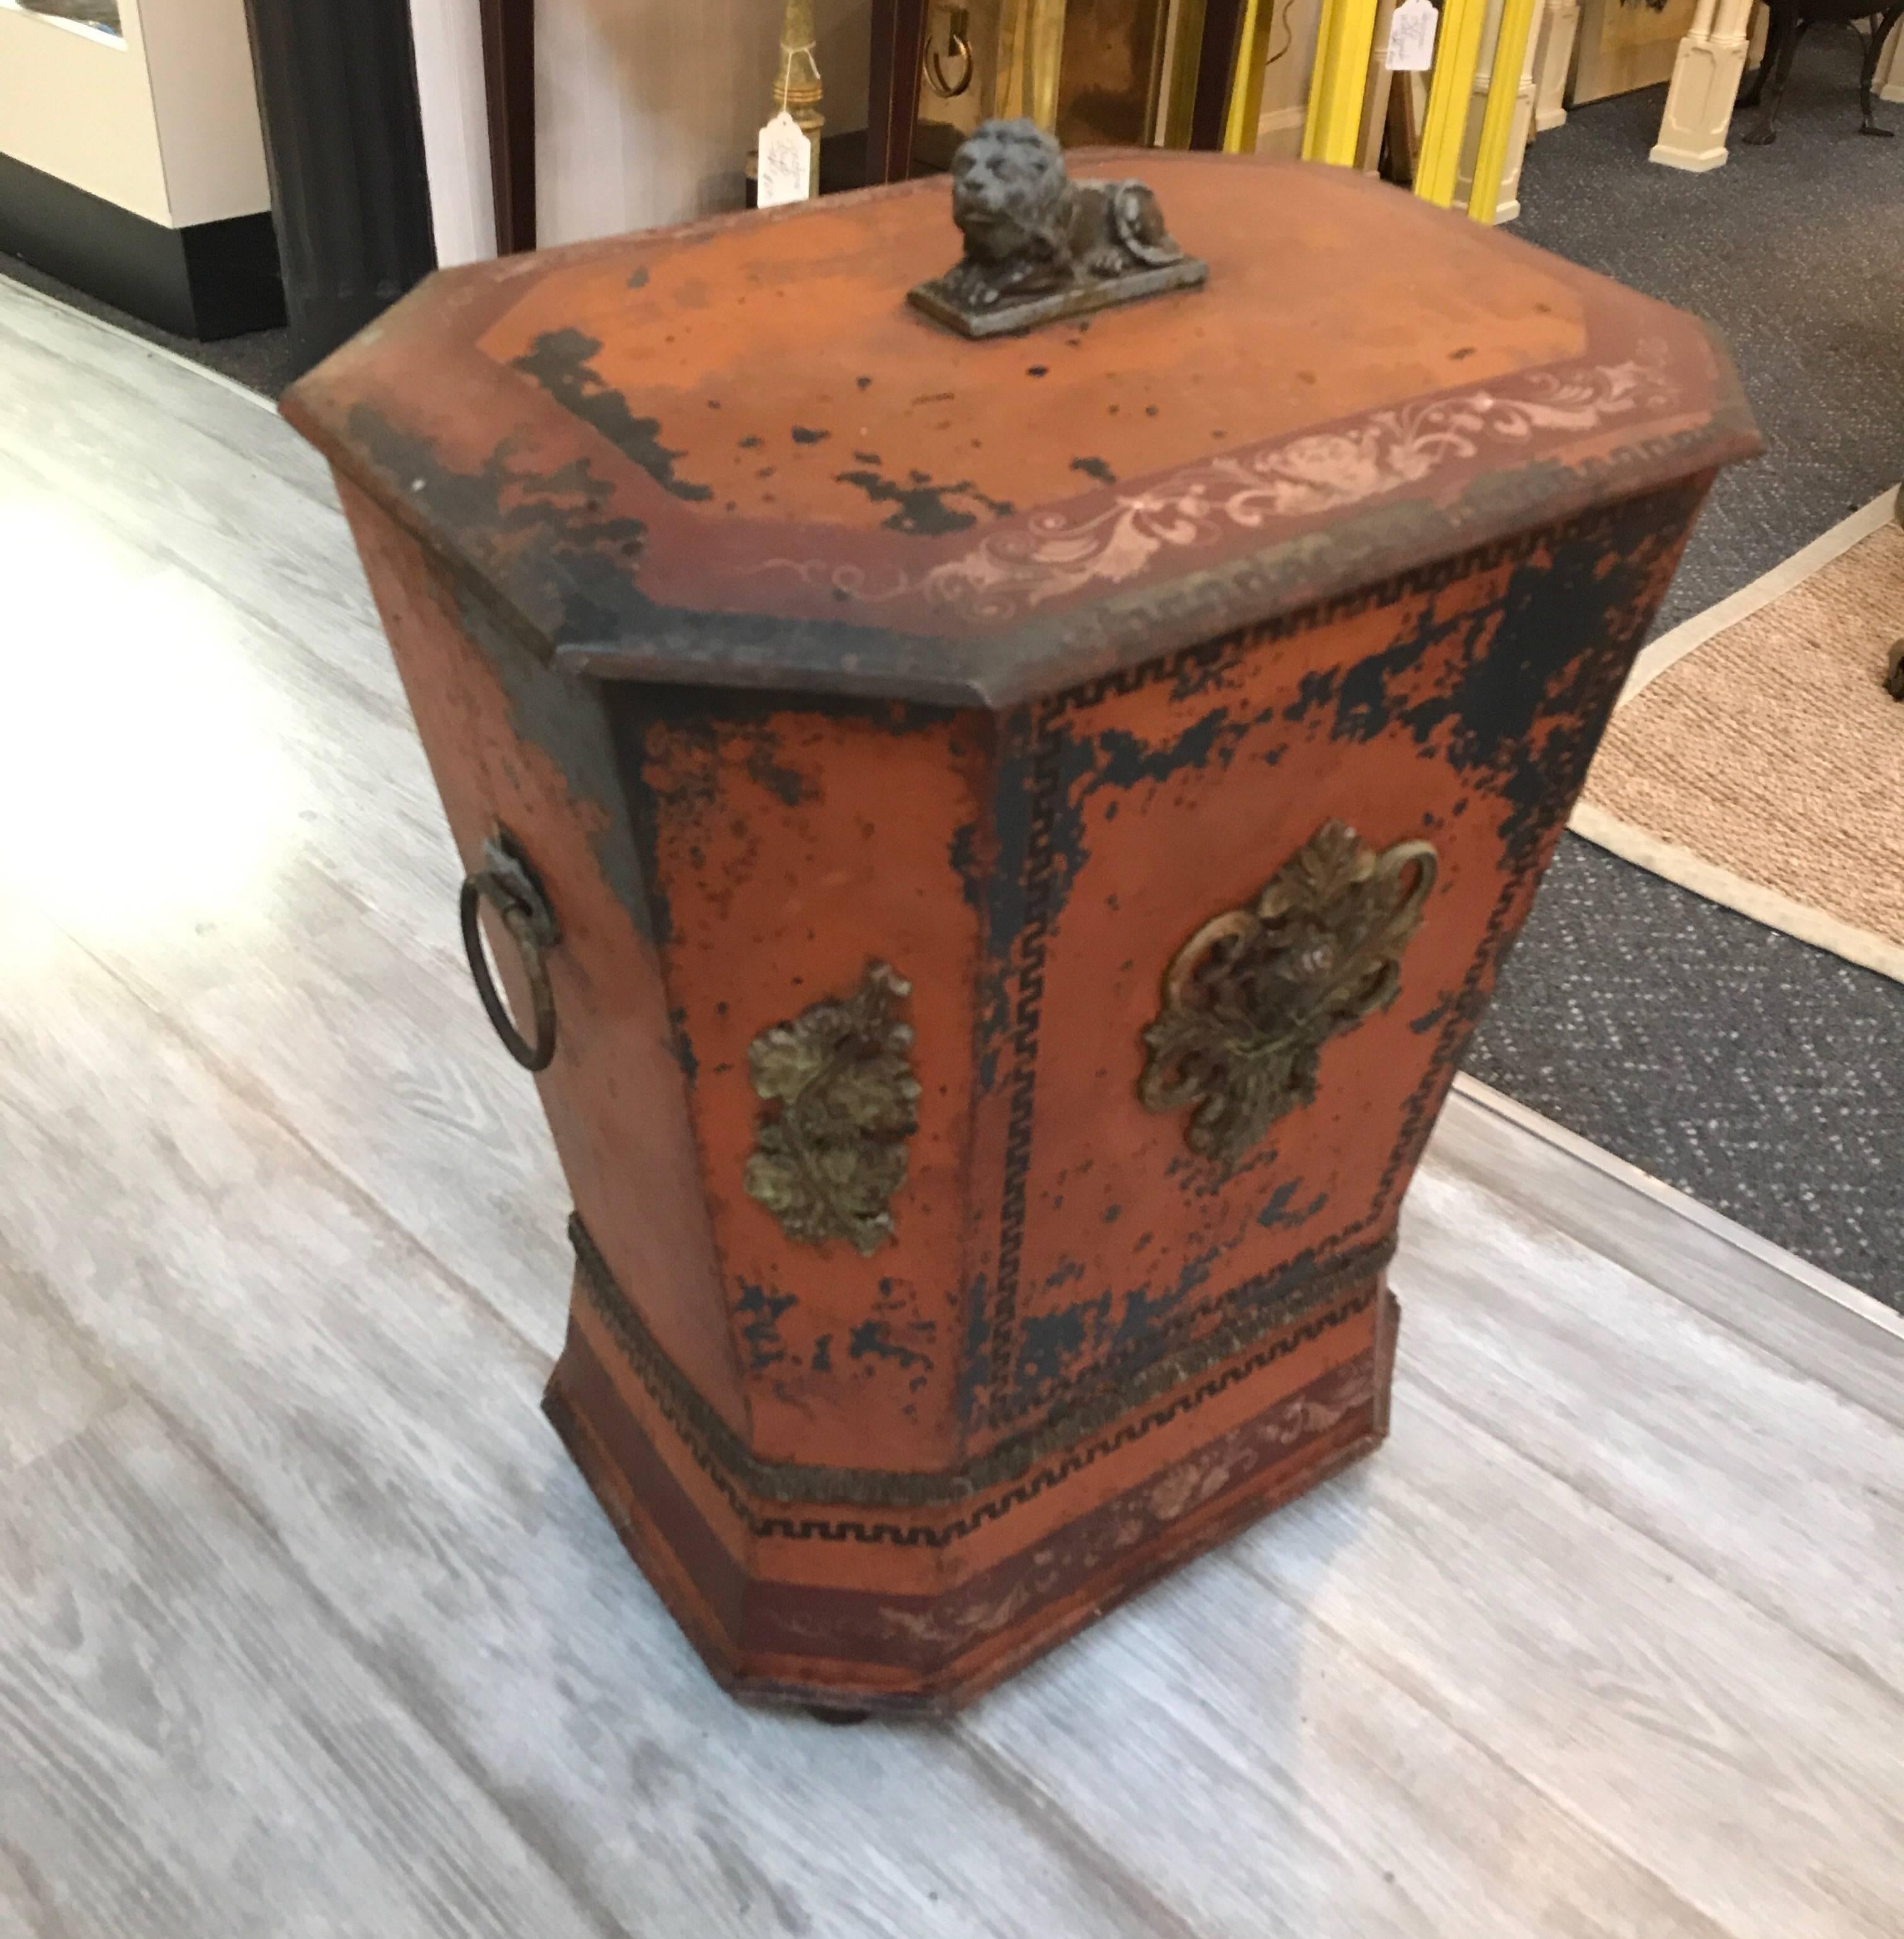 The tole tinder box with original paint showing years of well cared for use, the background color is a pumpkin orange with gilt and painted highlights with a zinc lion finial top and ring handles.